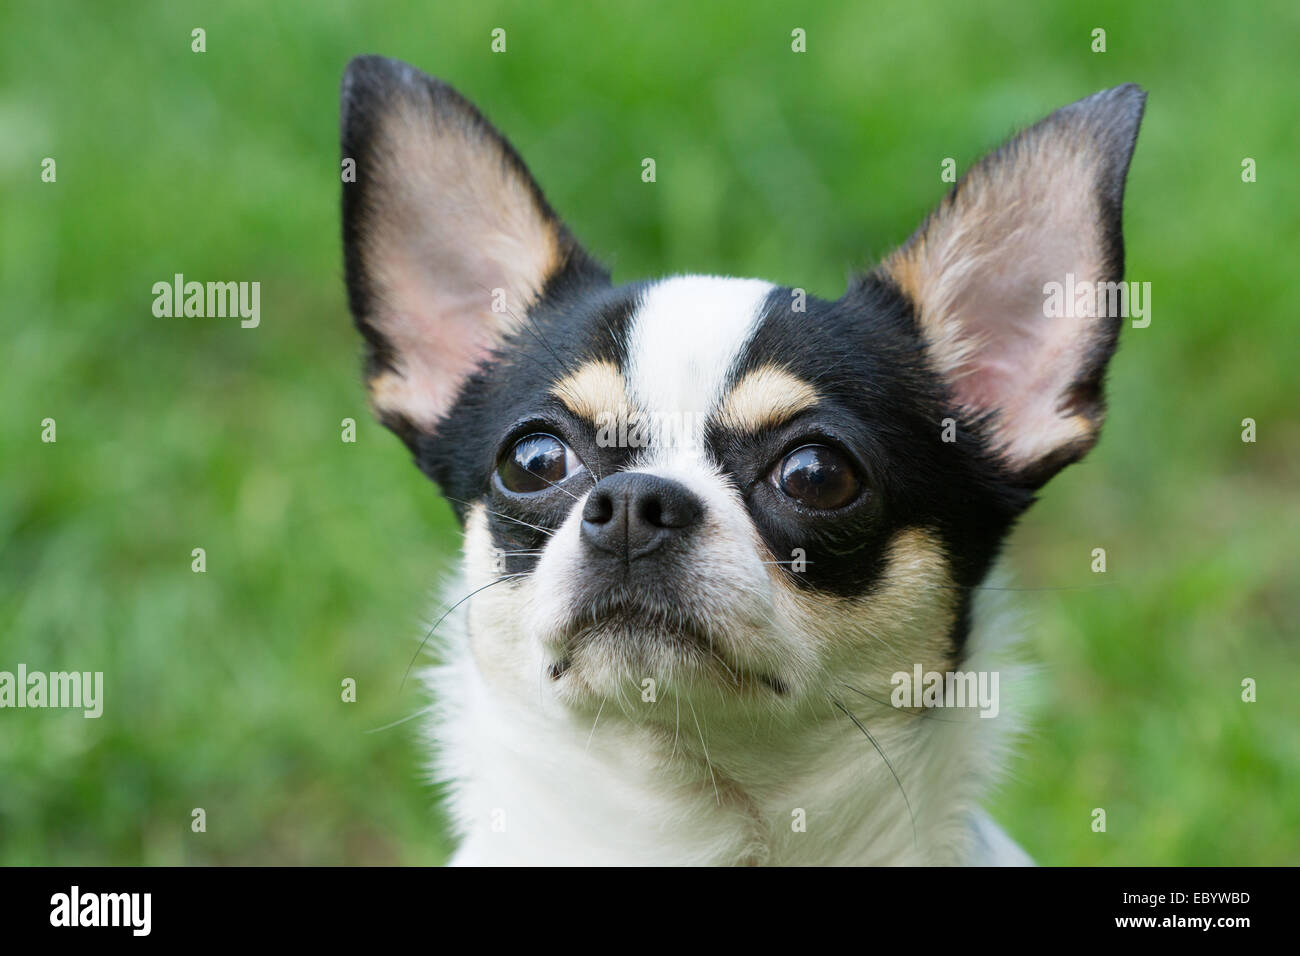 One Chihuahua lies on the grass lawn Stock Photo